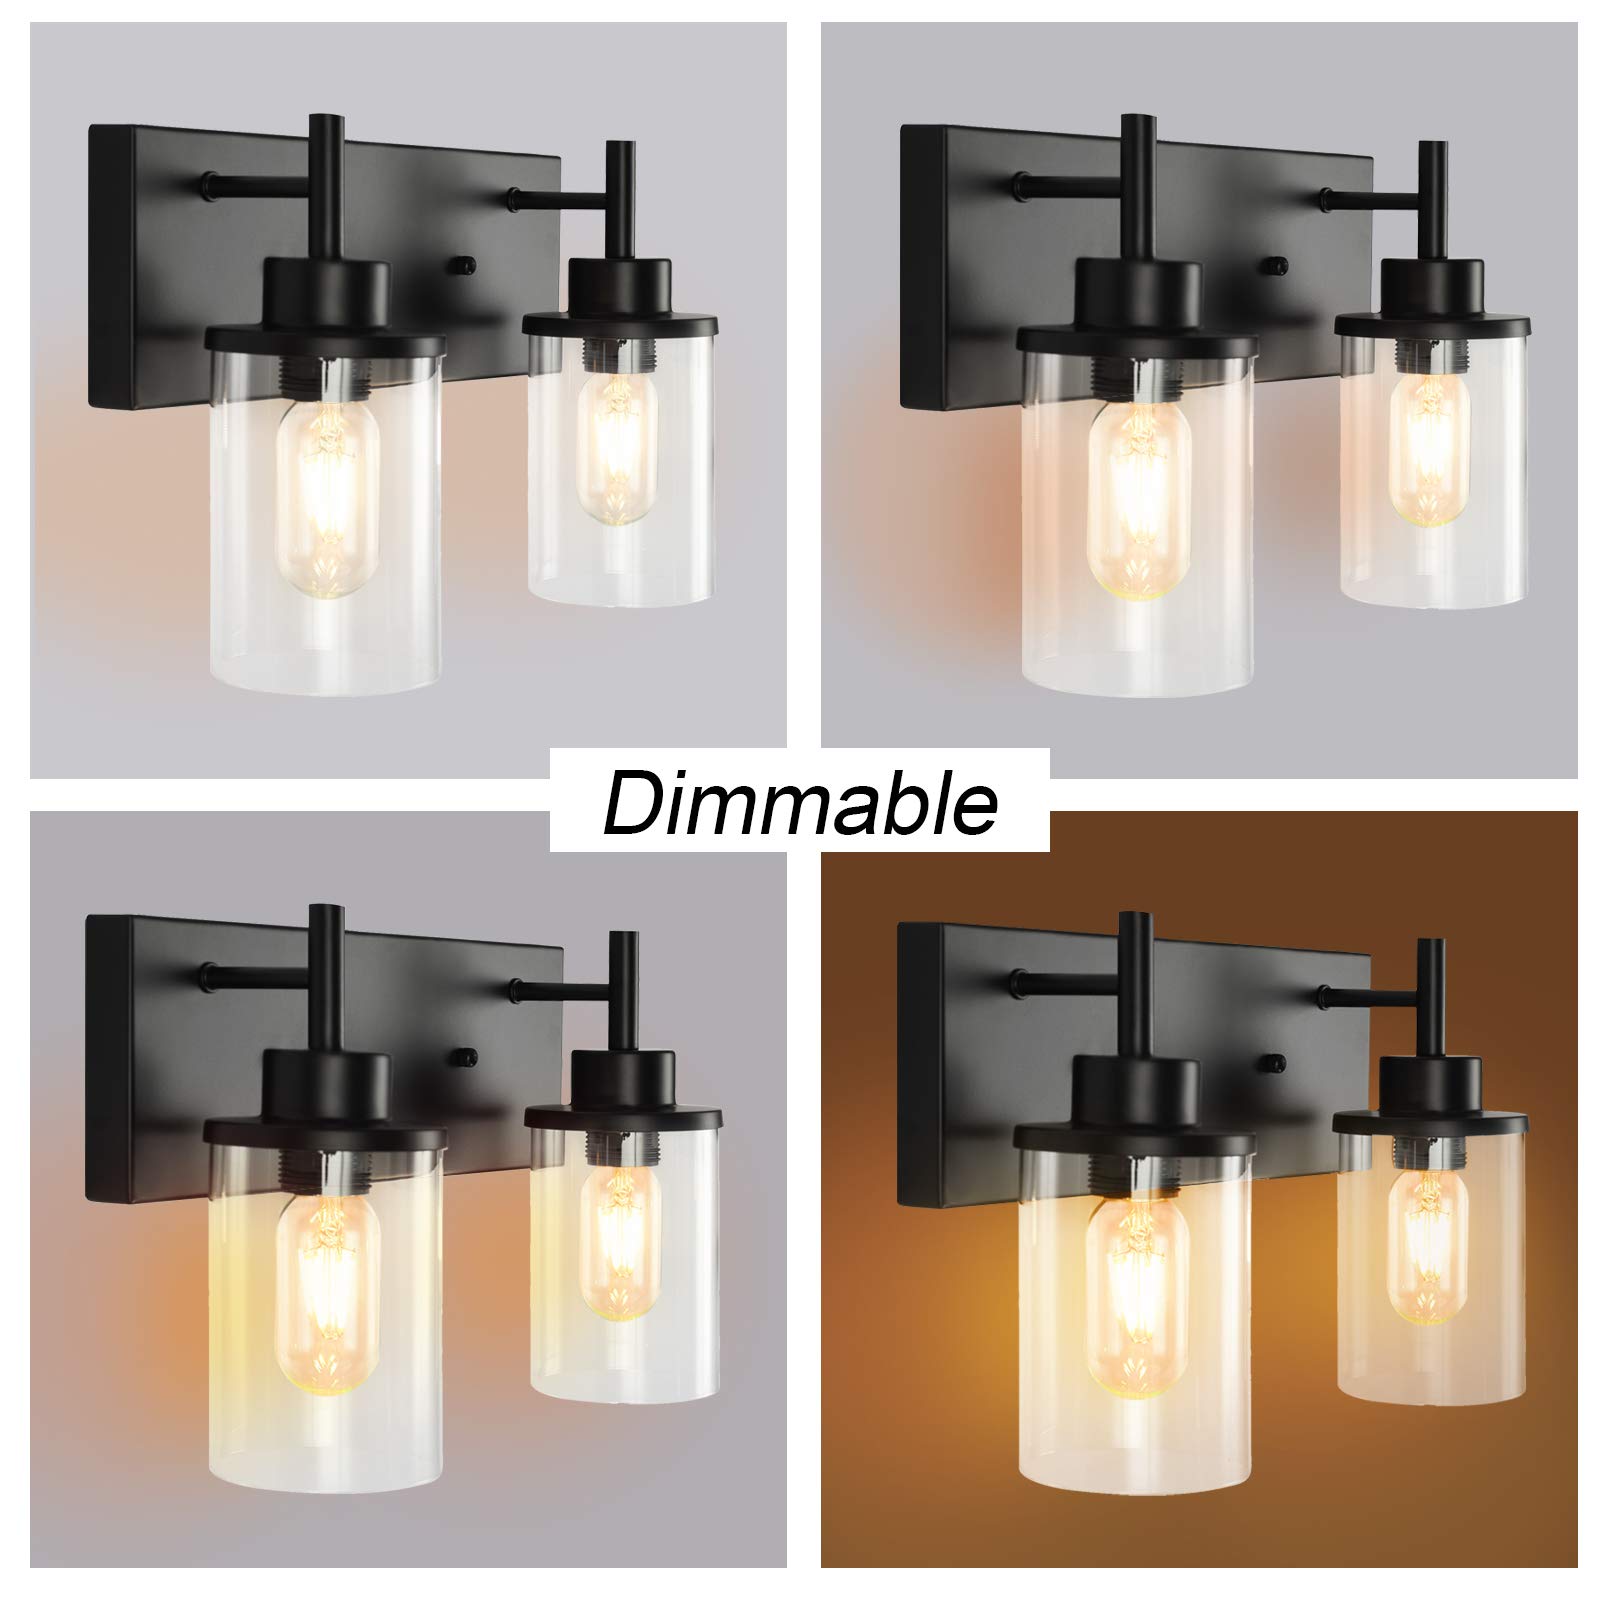 GoYeel Bathroom Vanity Light Fixtures, 2 Light Wall Sconce Black Vintage Industrial Farmhouse Sconces Wall Lighting with Clear Glass Shade for Bathroom Bedroom Living Room